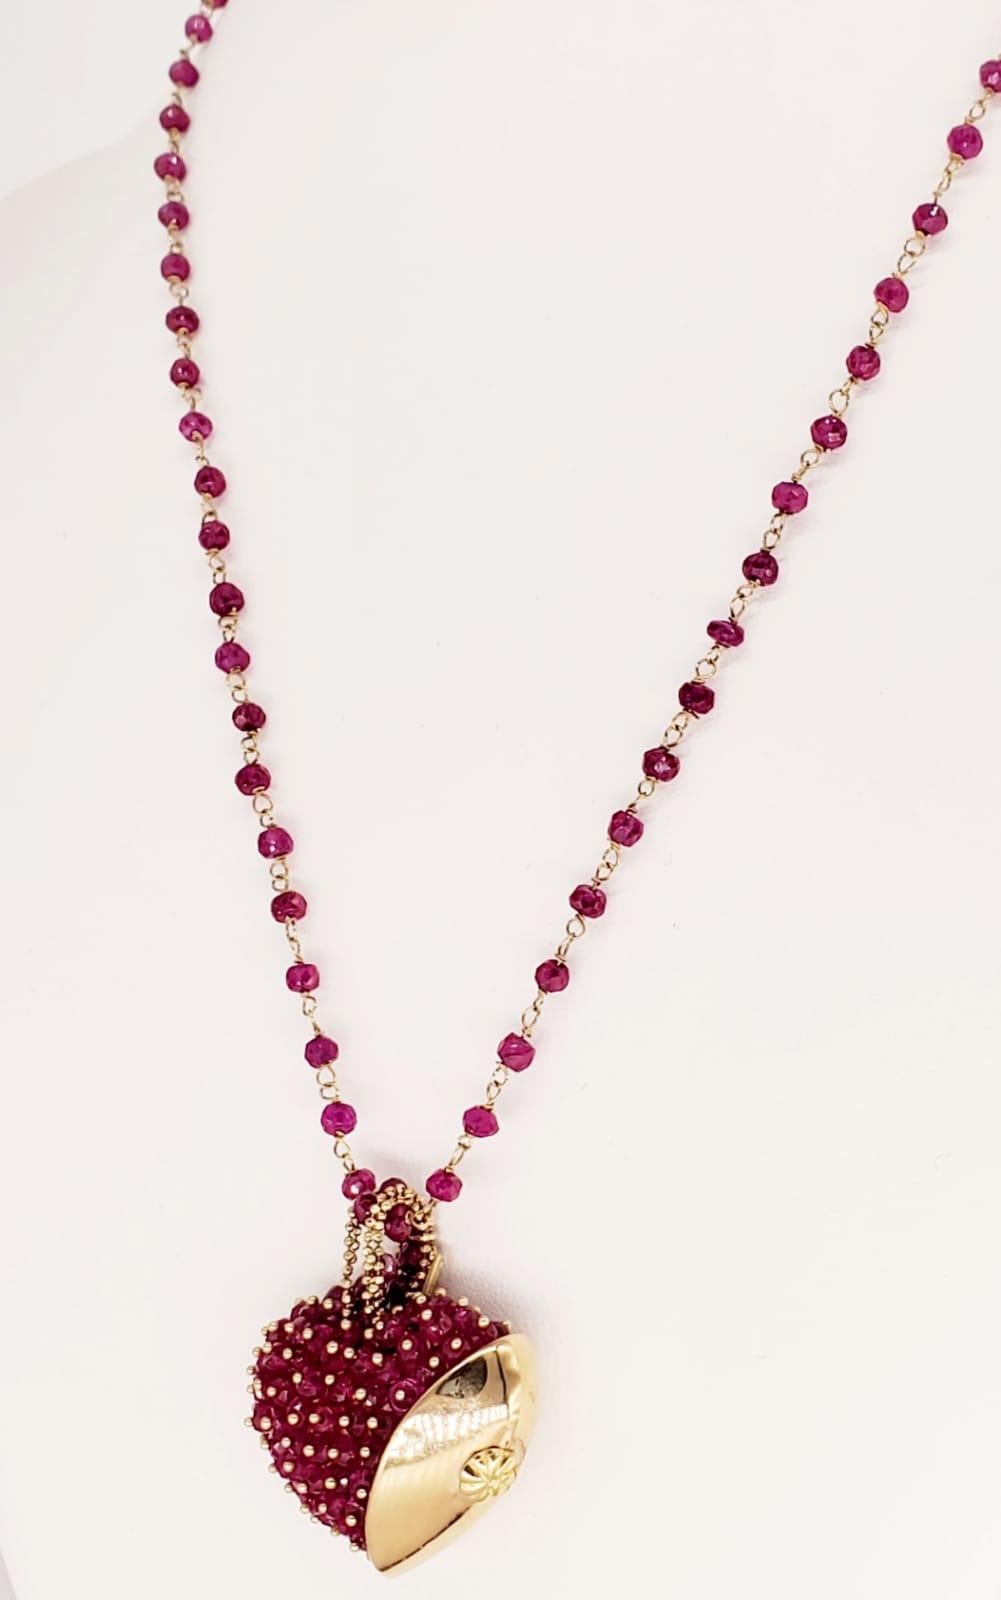 Rough Cut Vintage Strawberry Heart 50 Carat Faceted Ruby Beads Necklace 14 Karat Gold